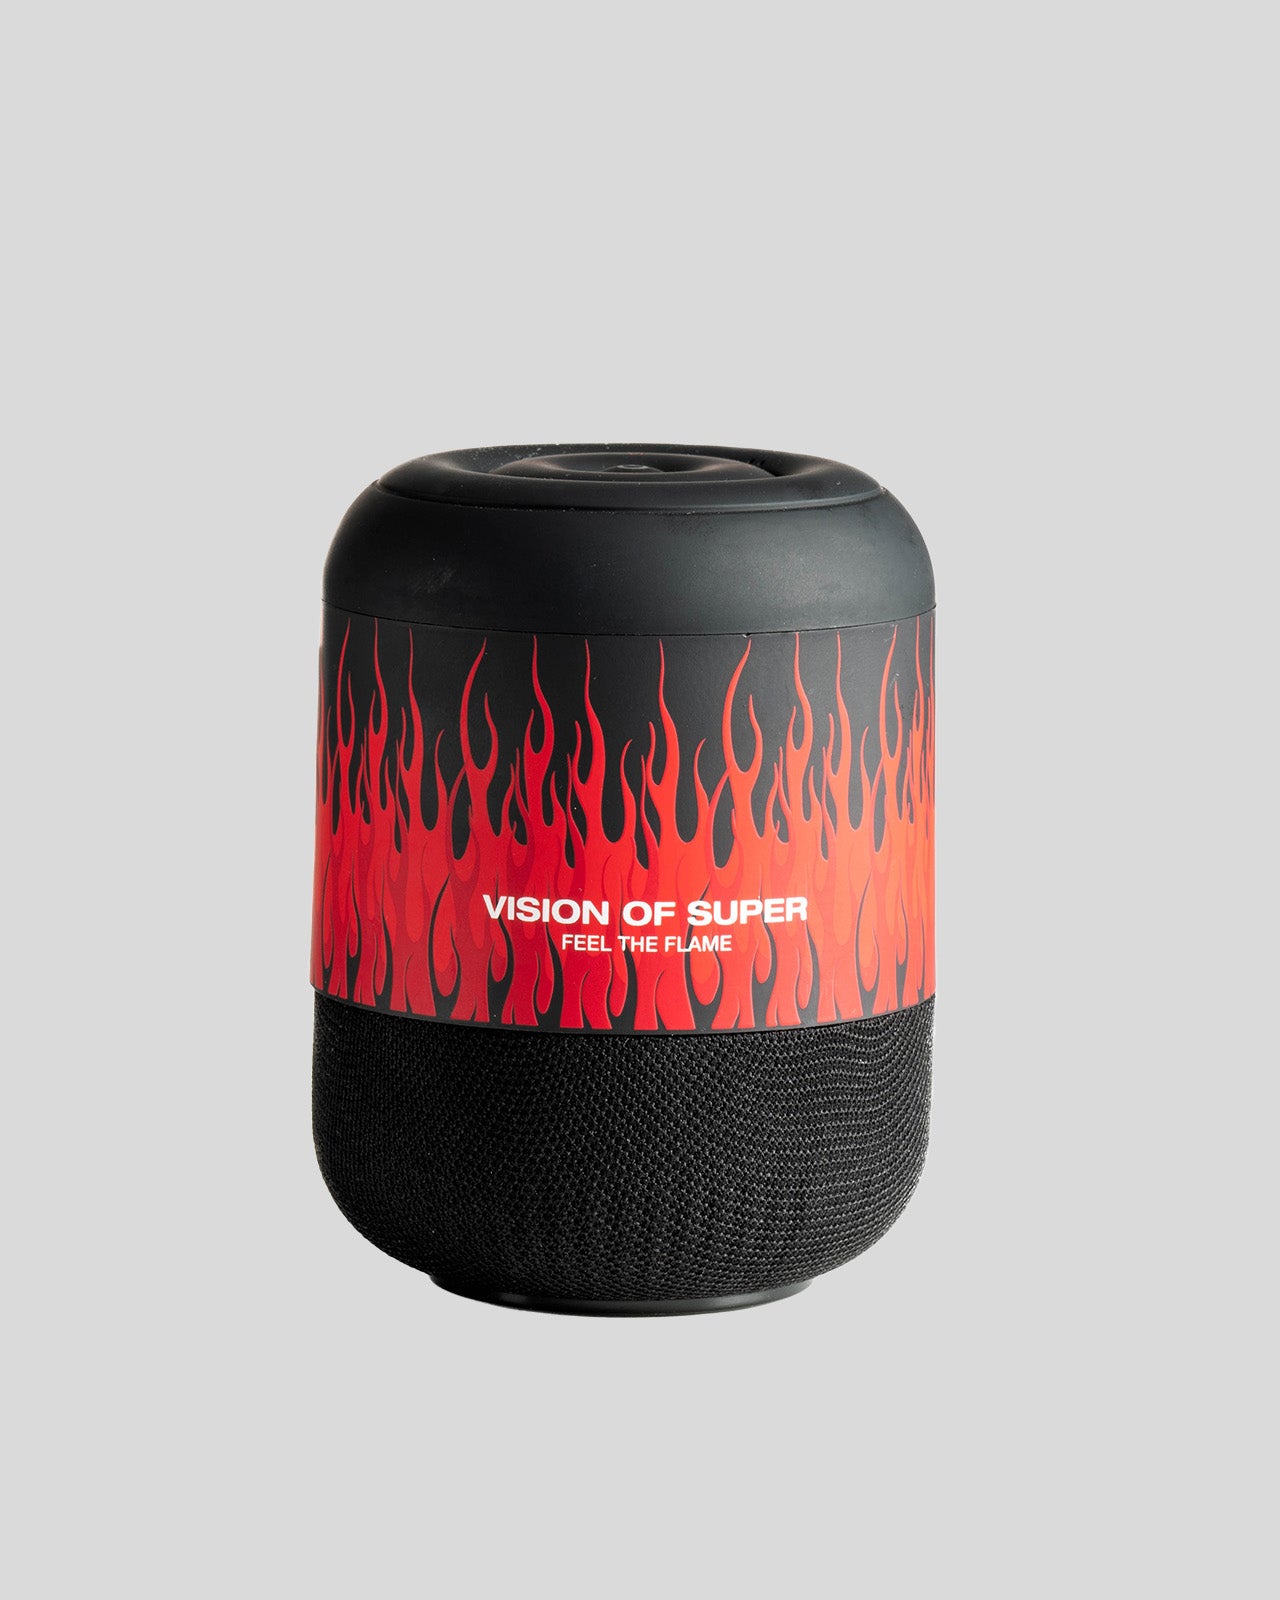 BLACK SPEAKER WITH RED FLAMES AND WHITE LOGO